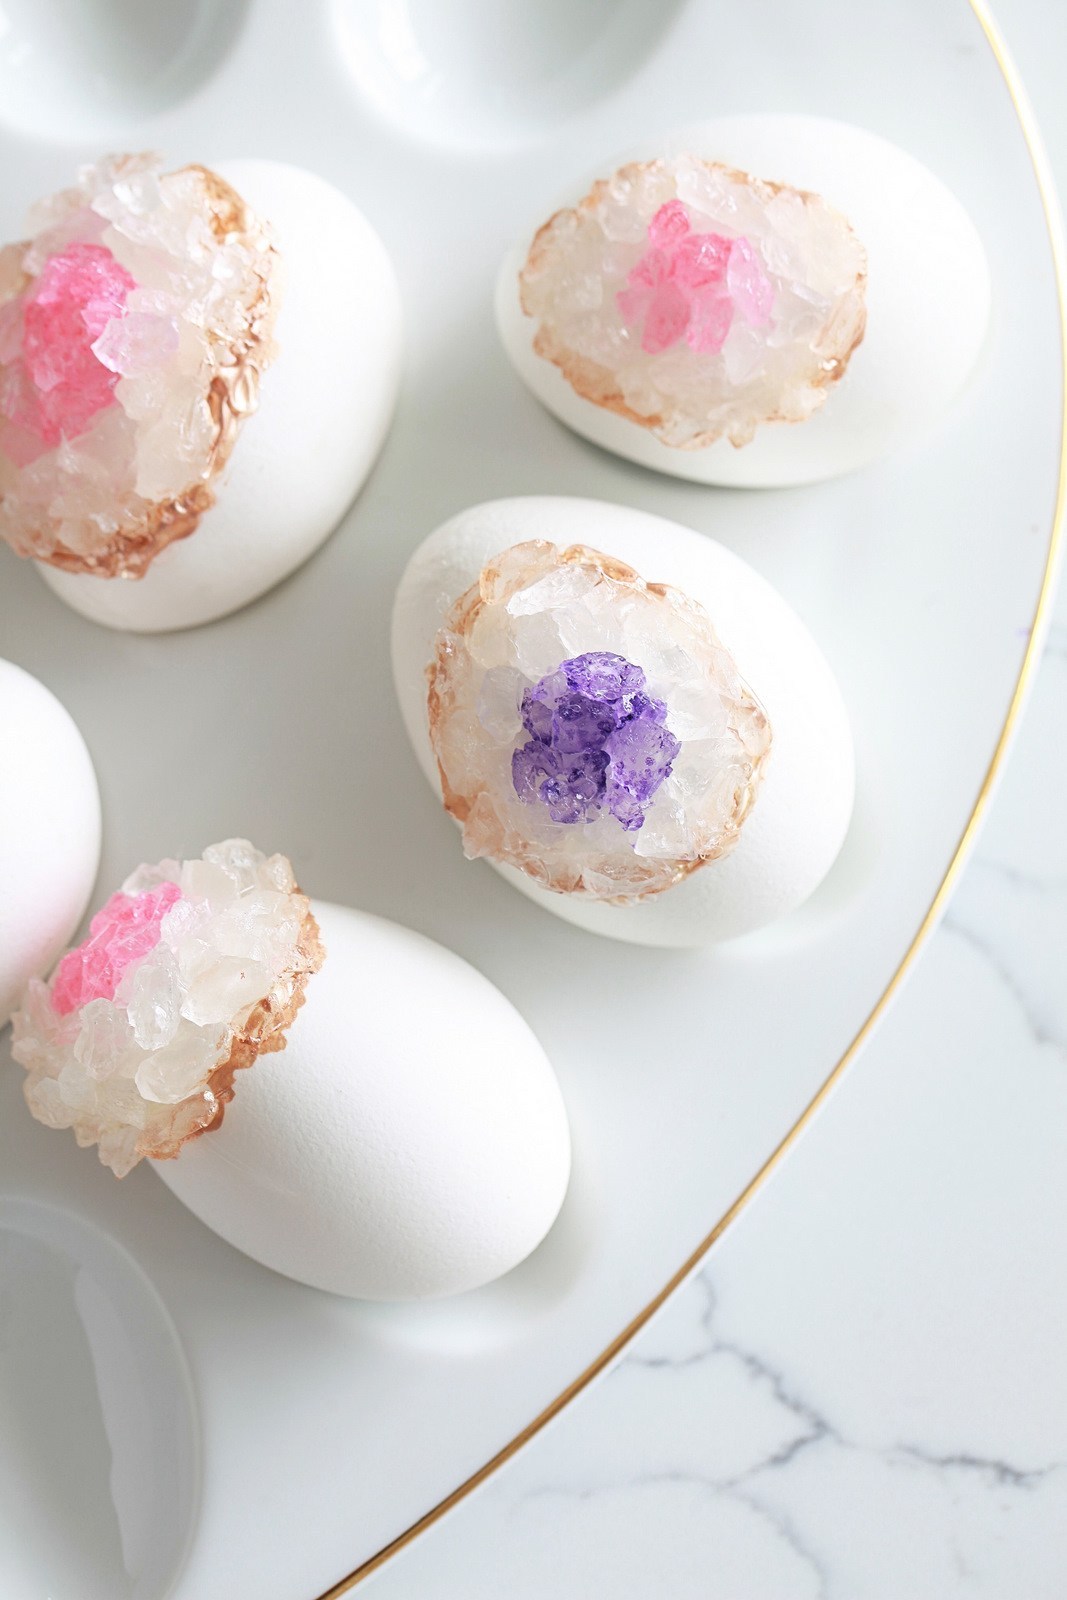 Egg decorating ideas for tweens and teens: geode Easter eggs DIY | Posh Little Designs